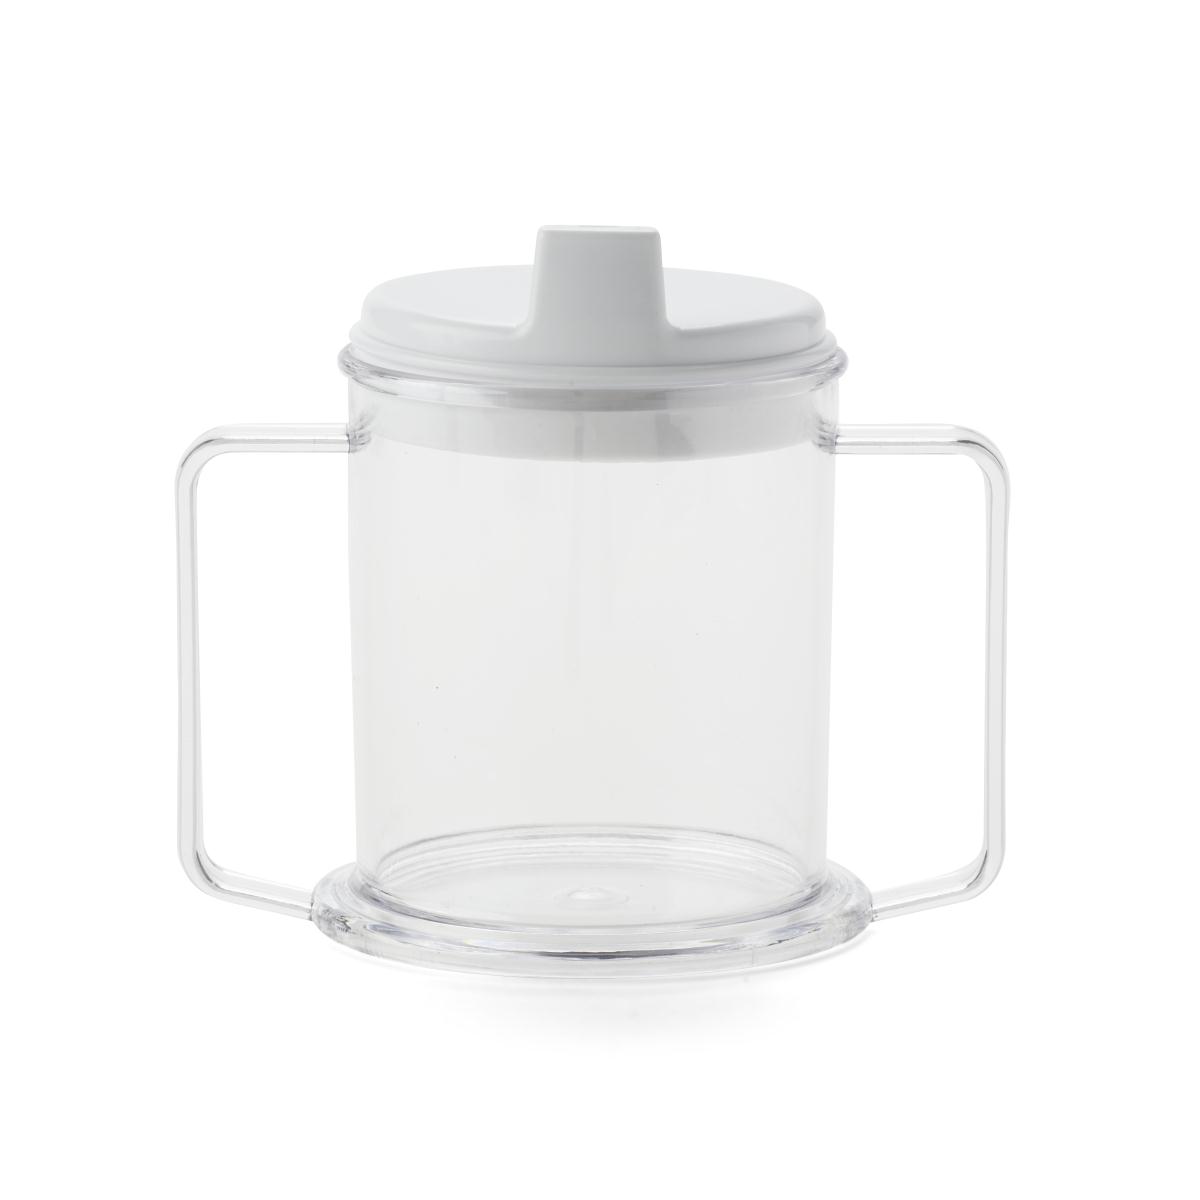 Two Handled Cups,Clear